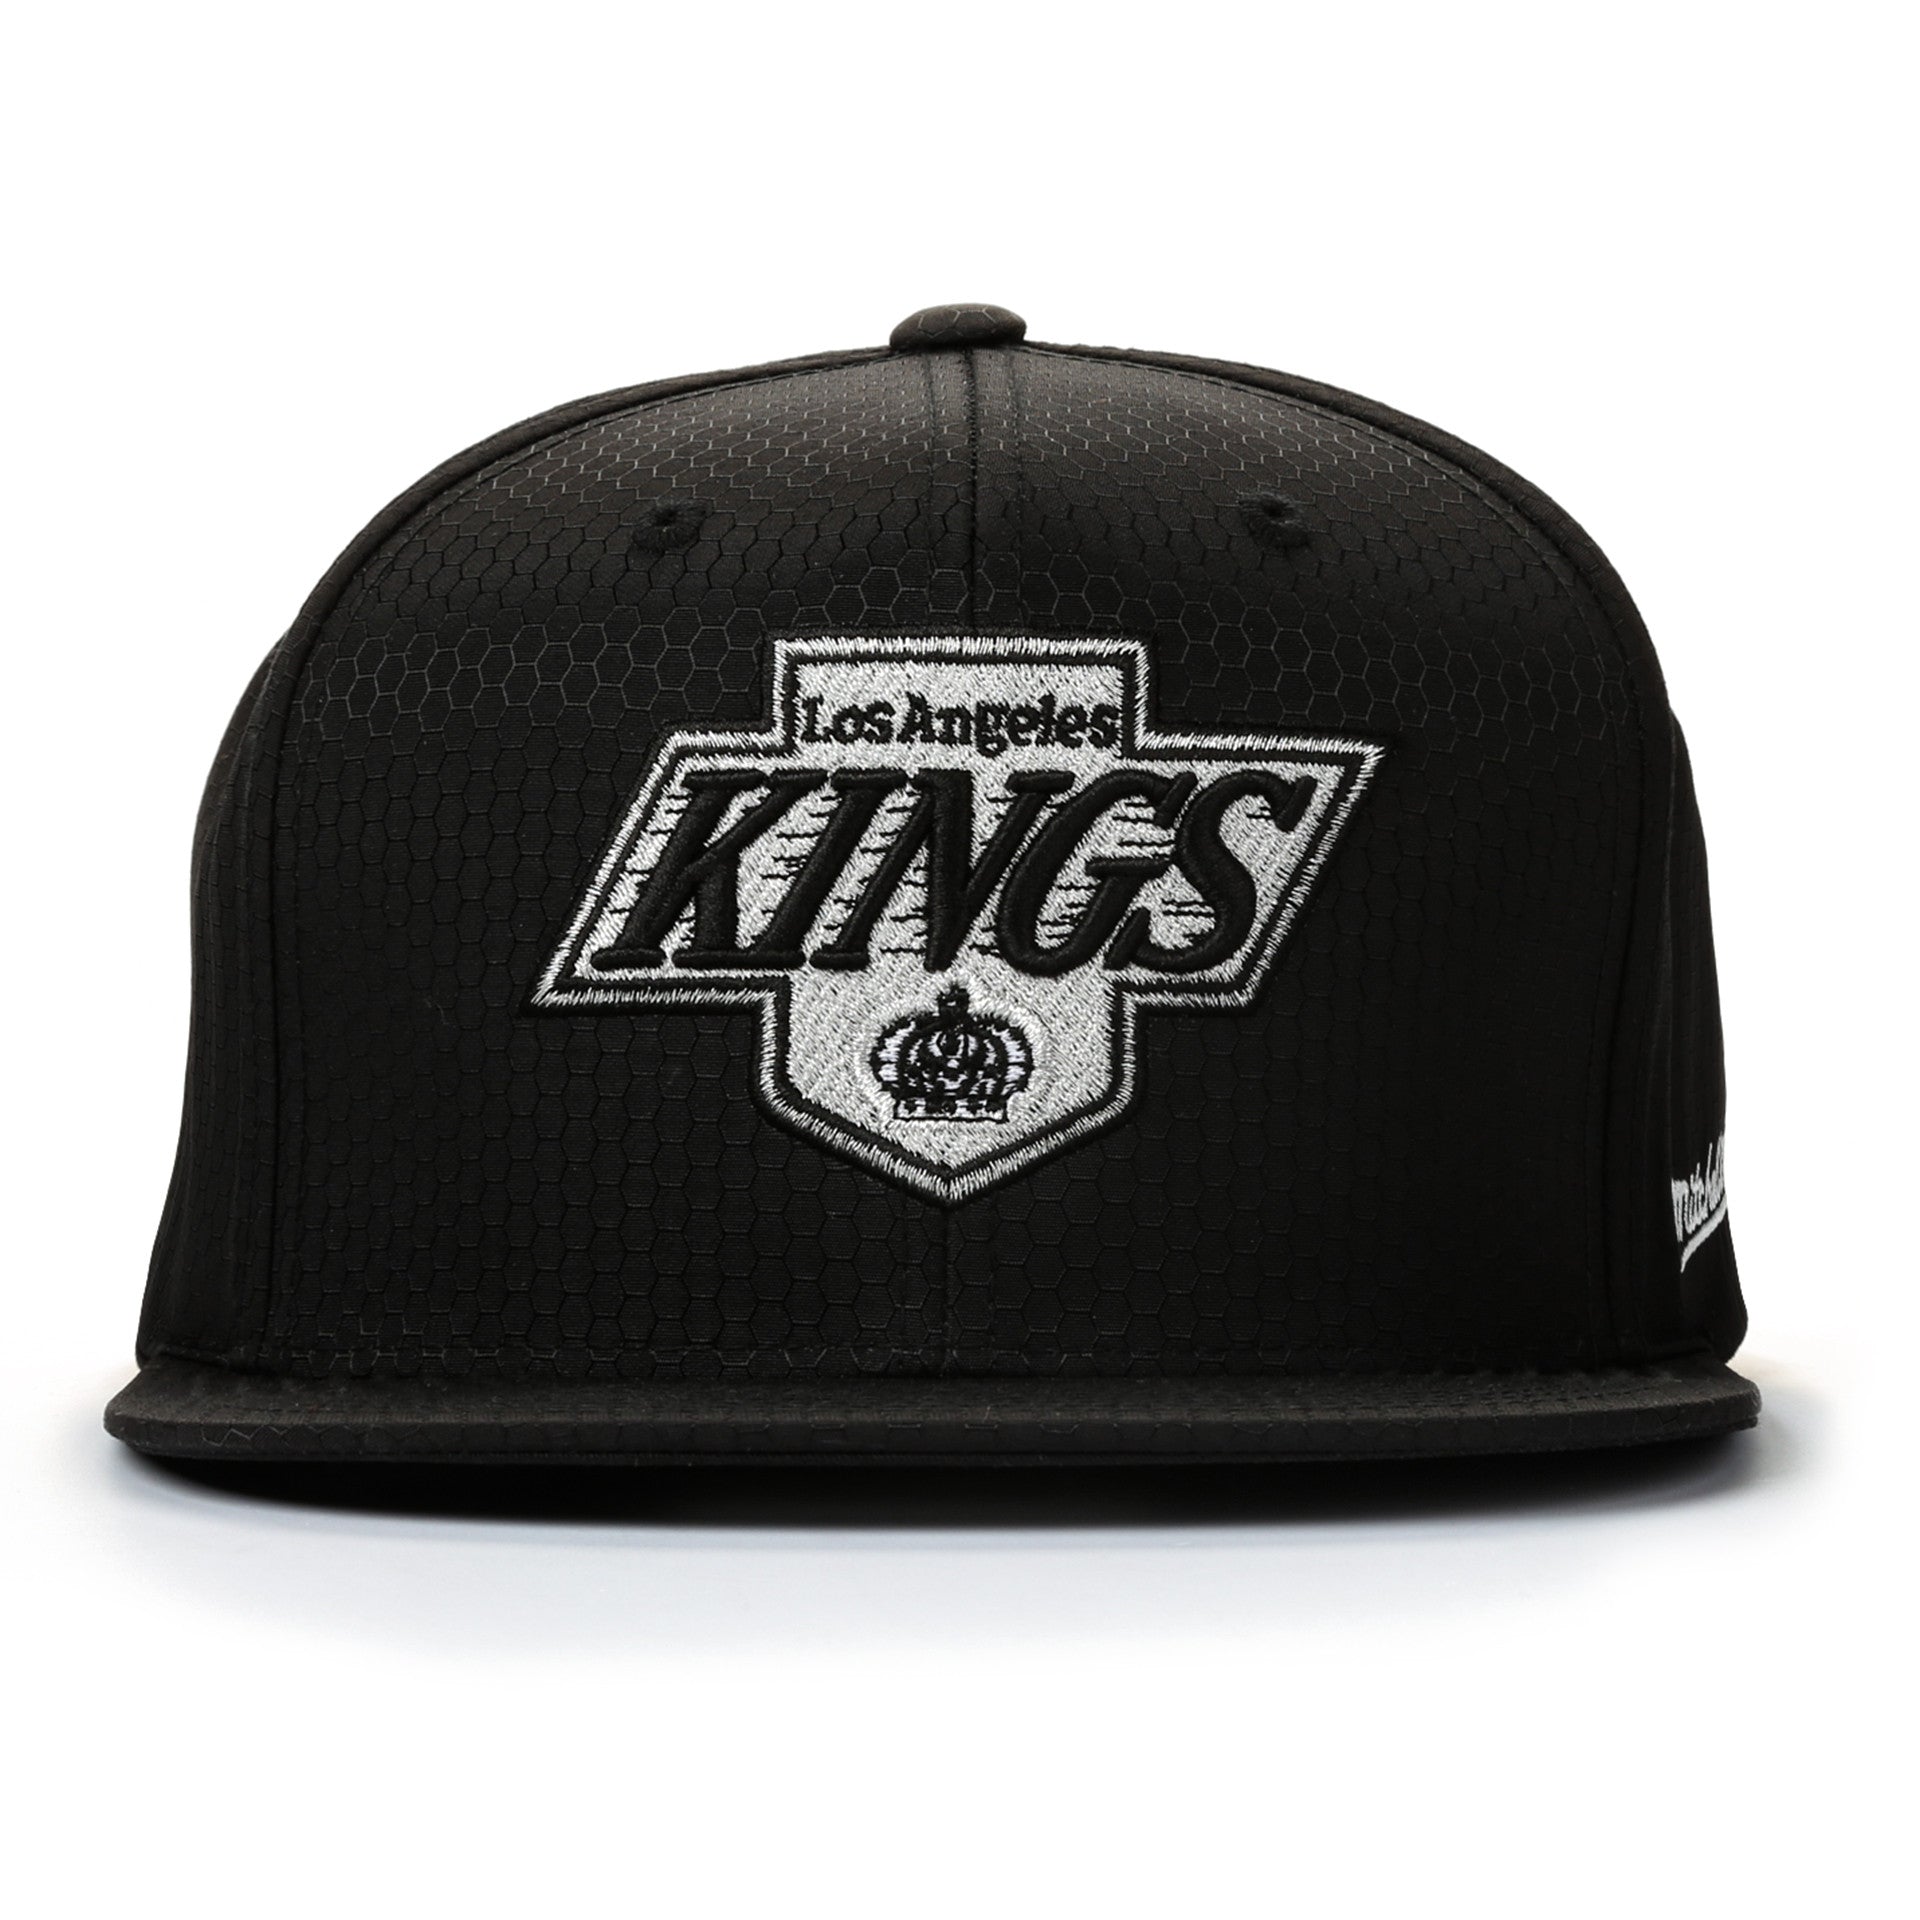 Mitchell and Ness Los Angeles Kings Snapback - Black - New Star